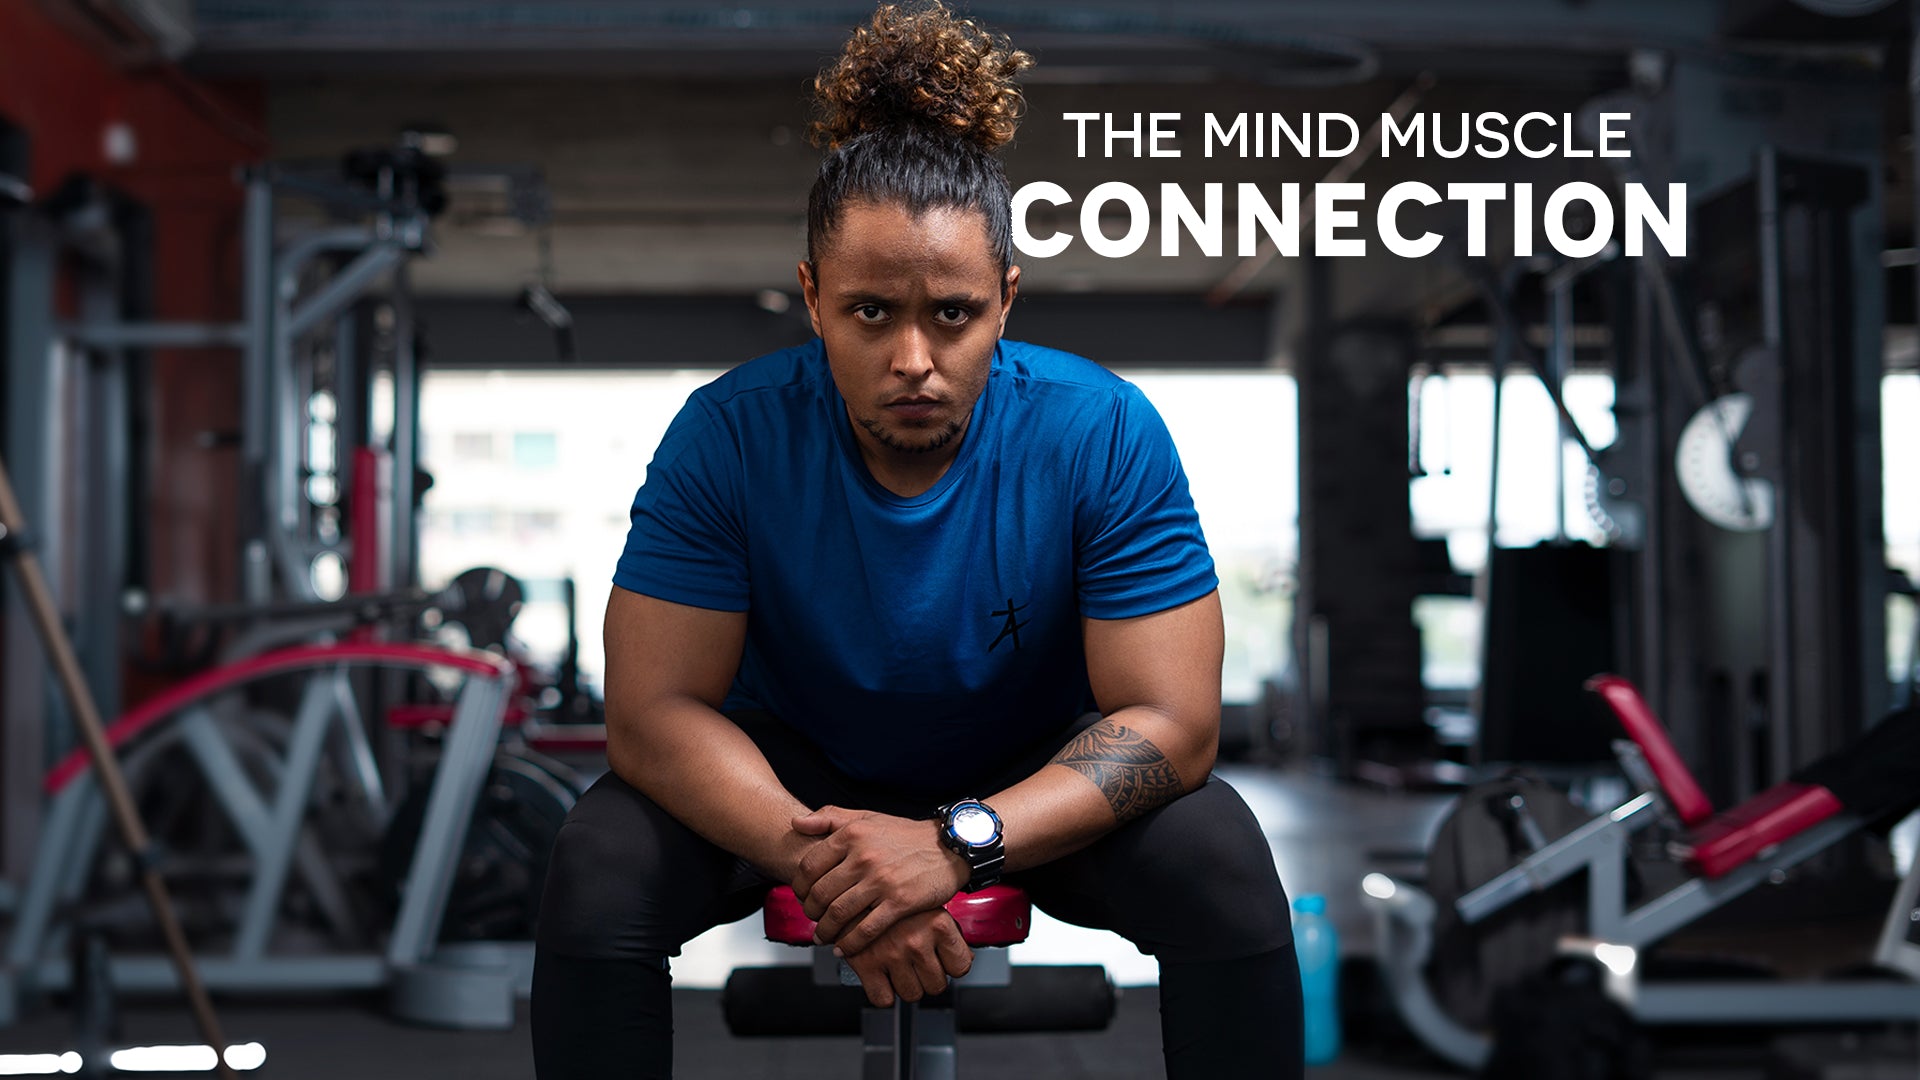 The mind-muscle connection